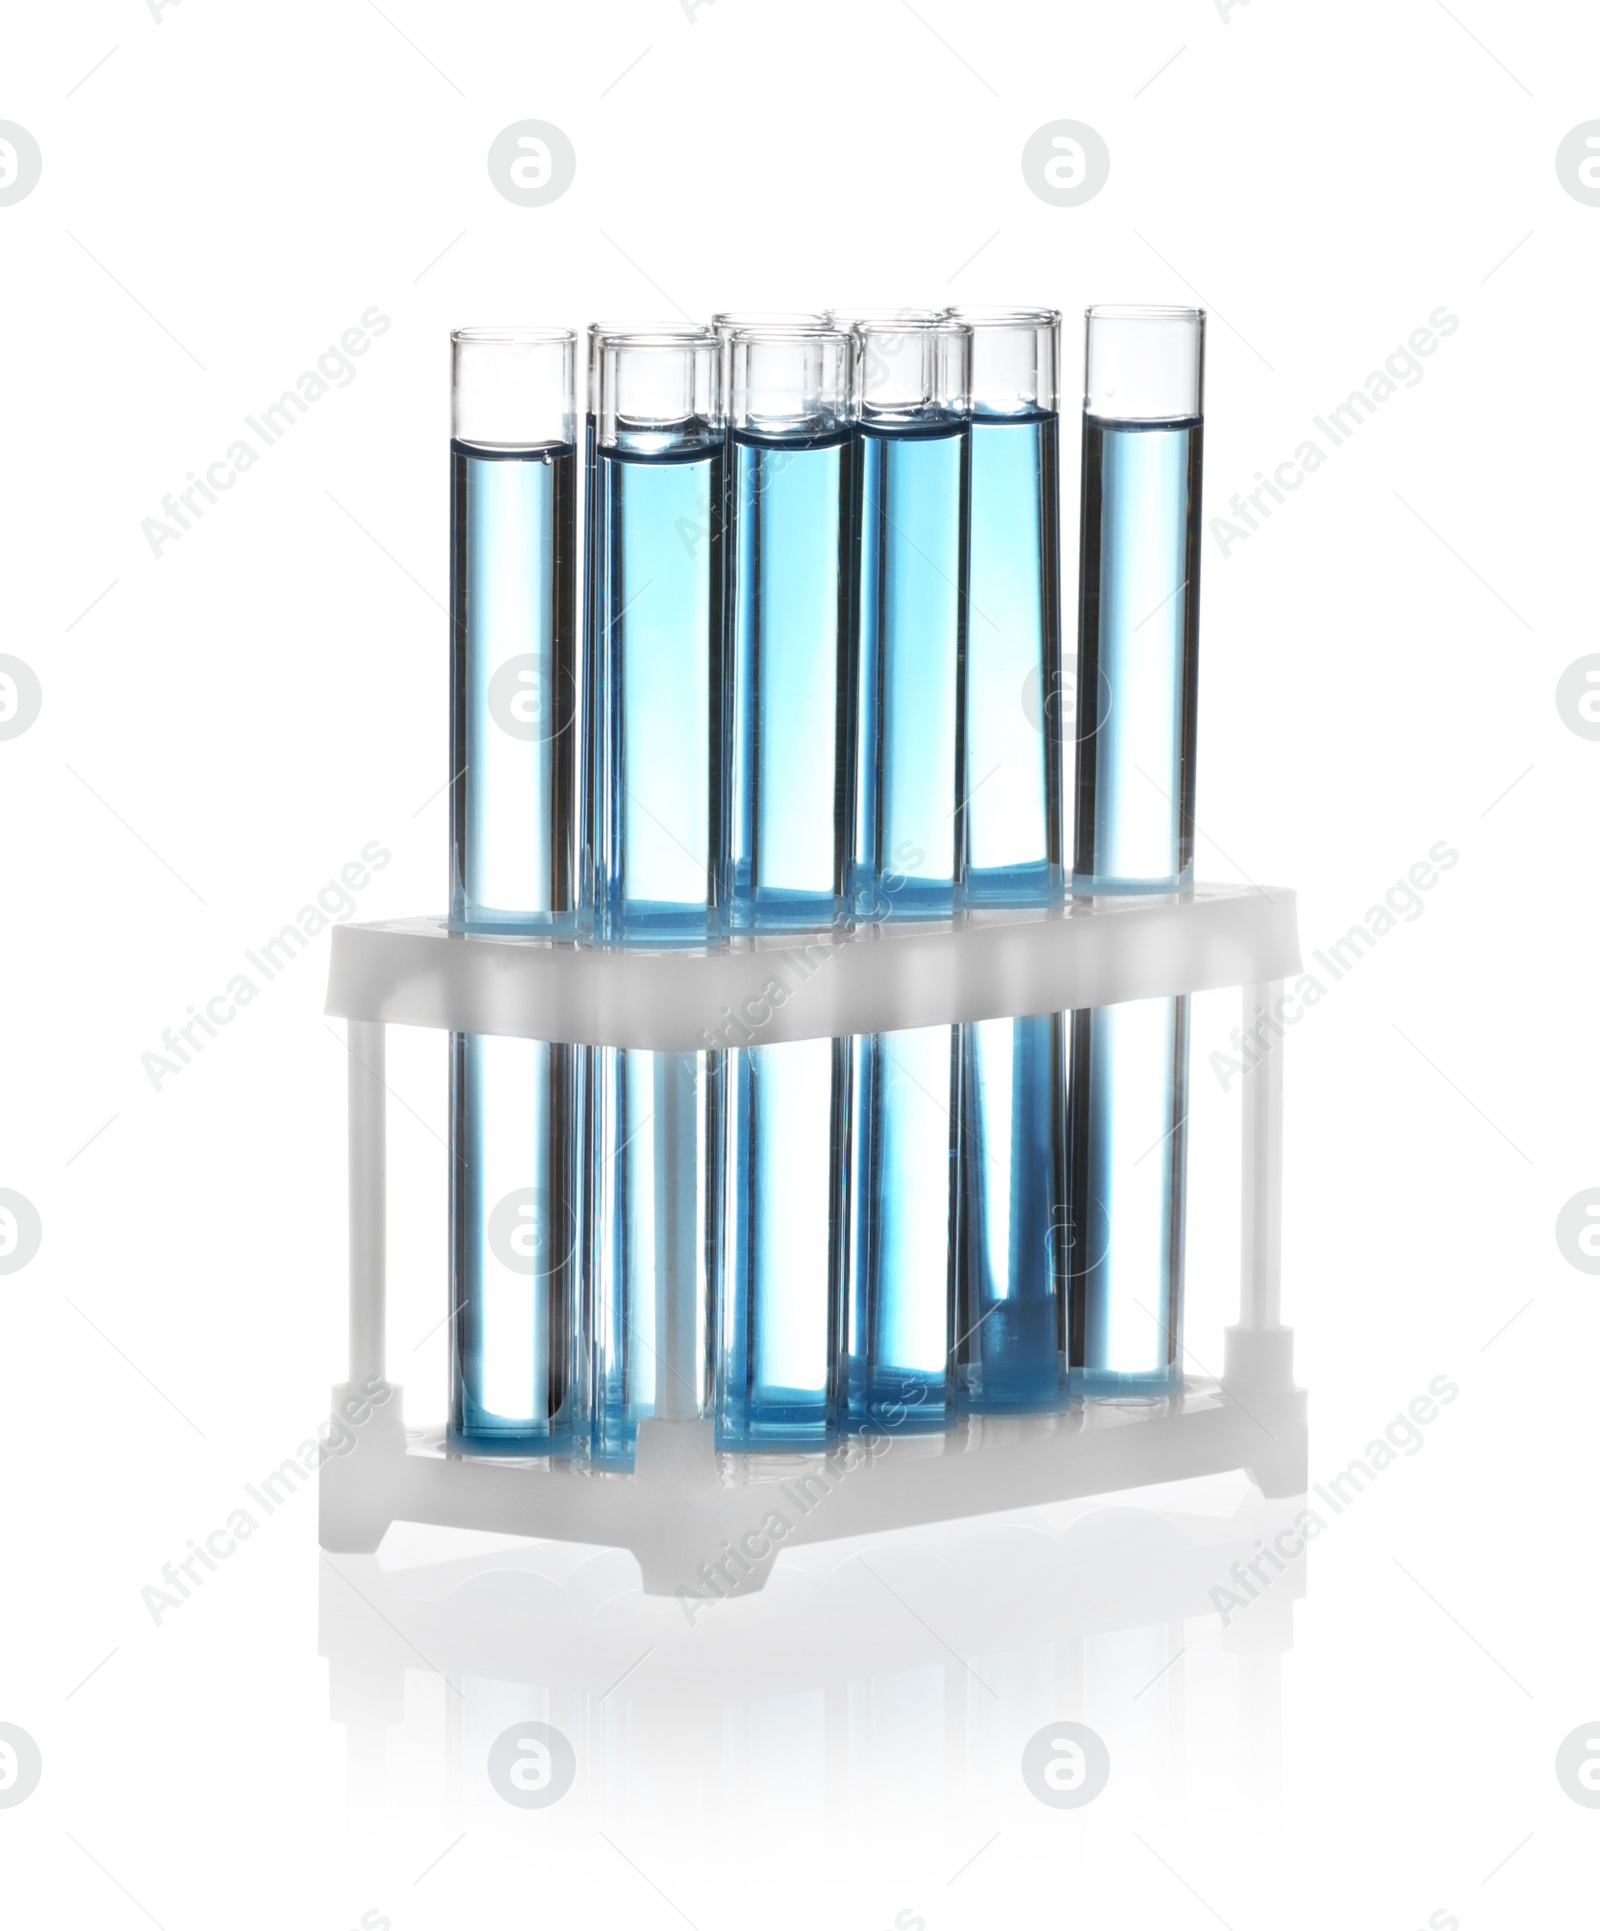 Photo of Test tubes with blue liquid isolated on white. Laboratory glassware